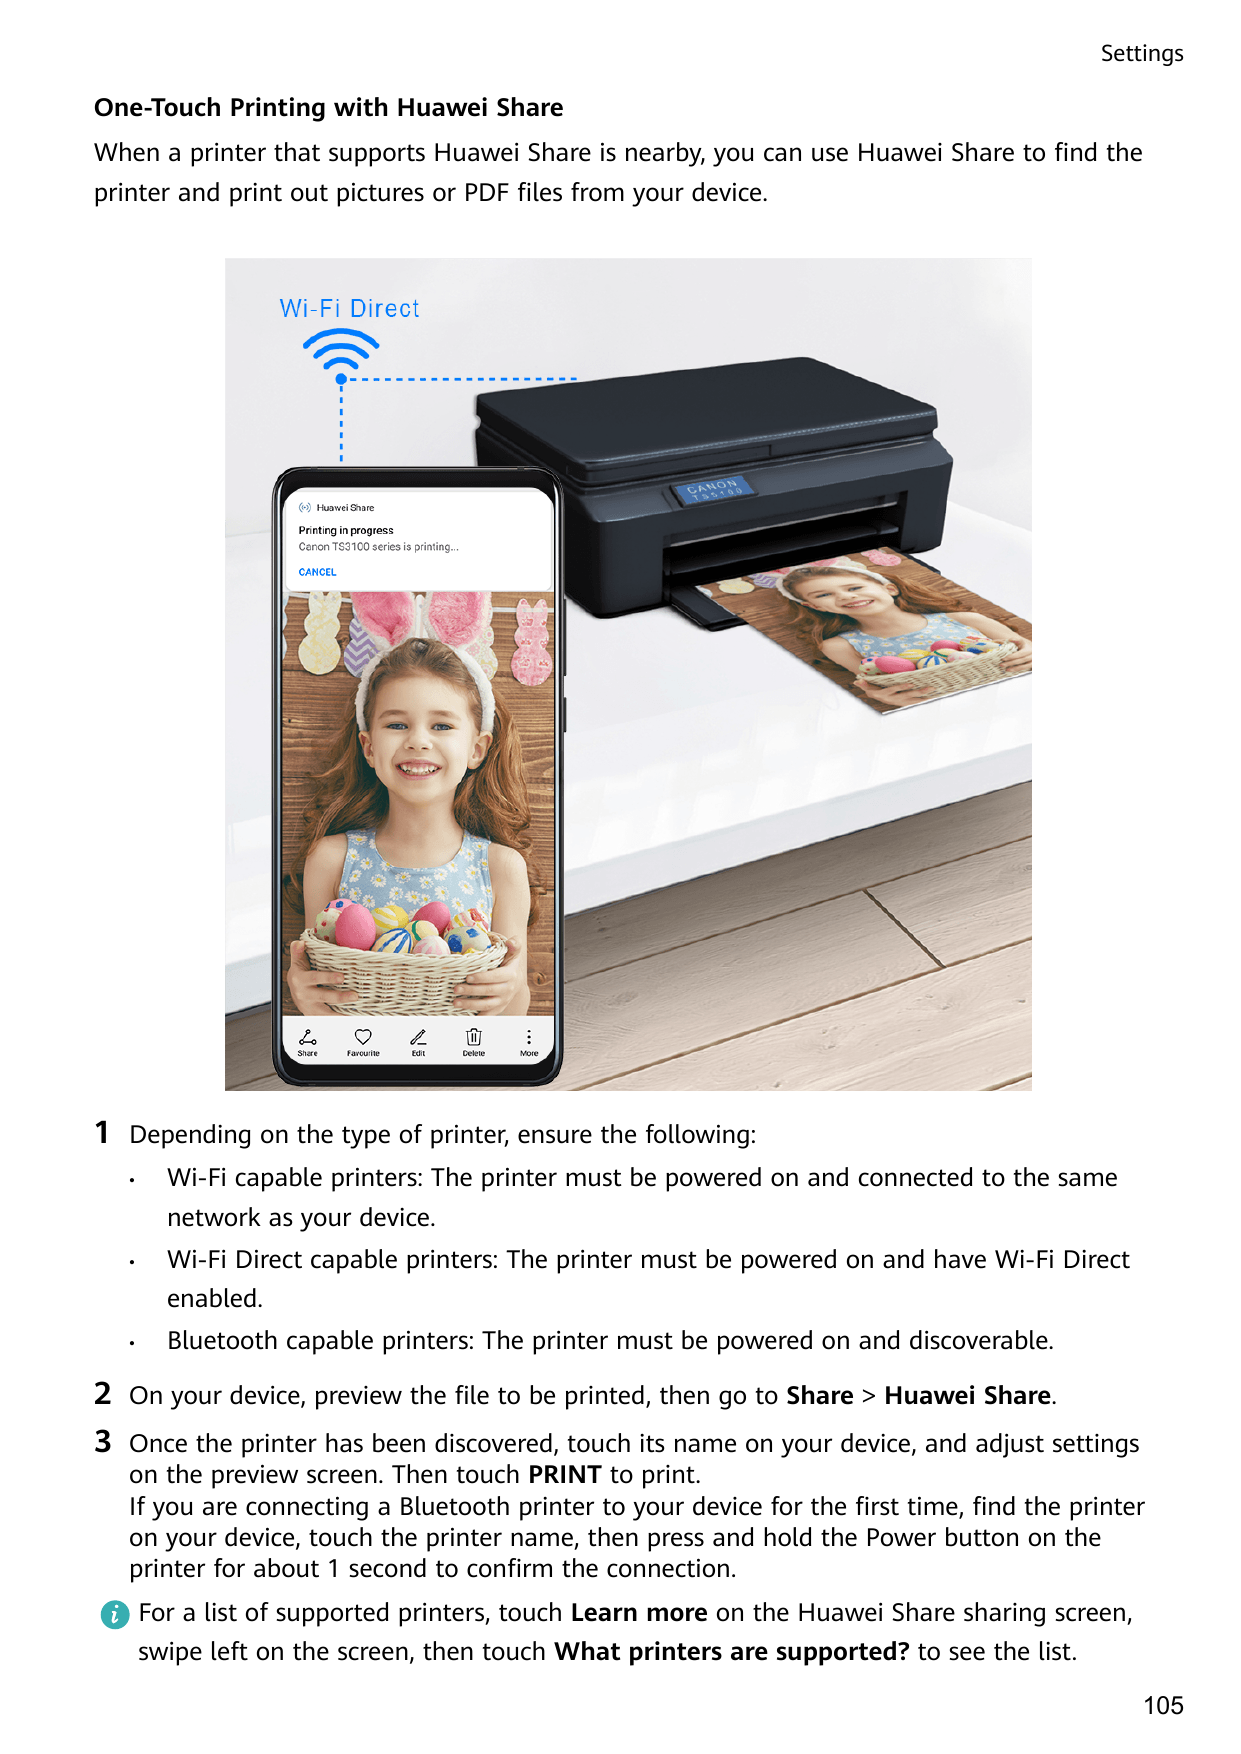 SettingsOne-Touch Printing with Huawei ShareWhen a printer that supports Huawei Share is nearby, you can use Huawei Share to fin